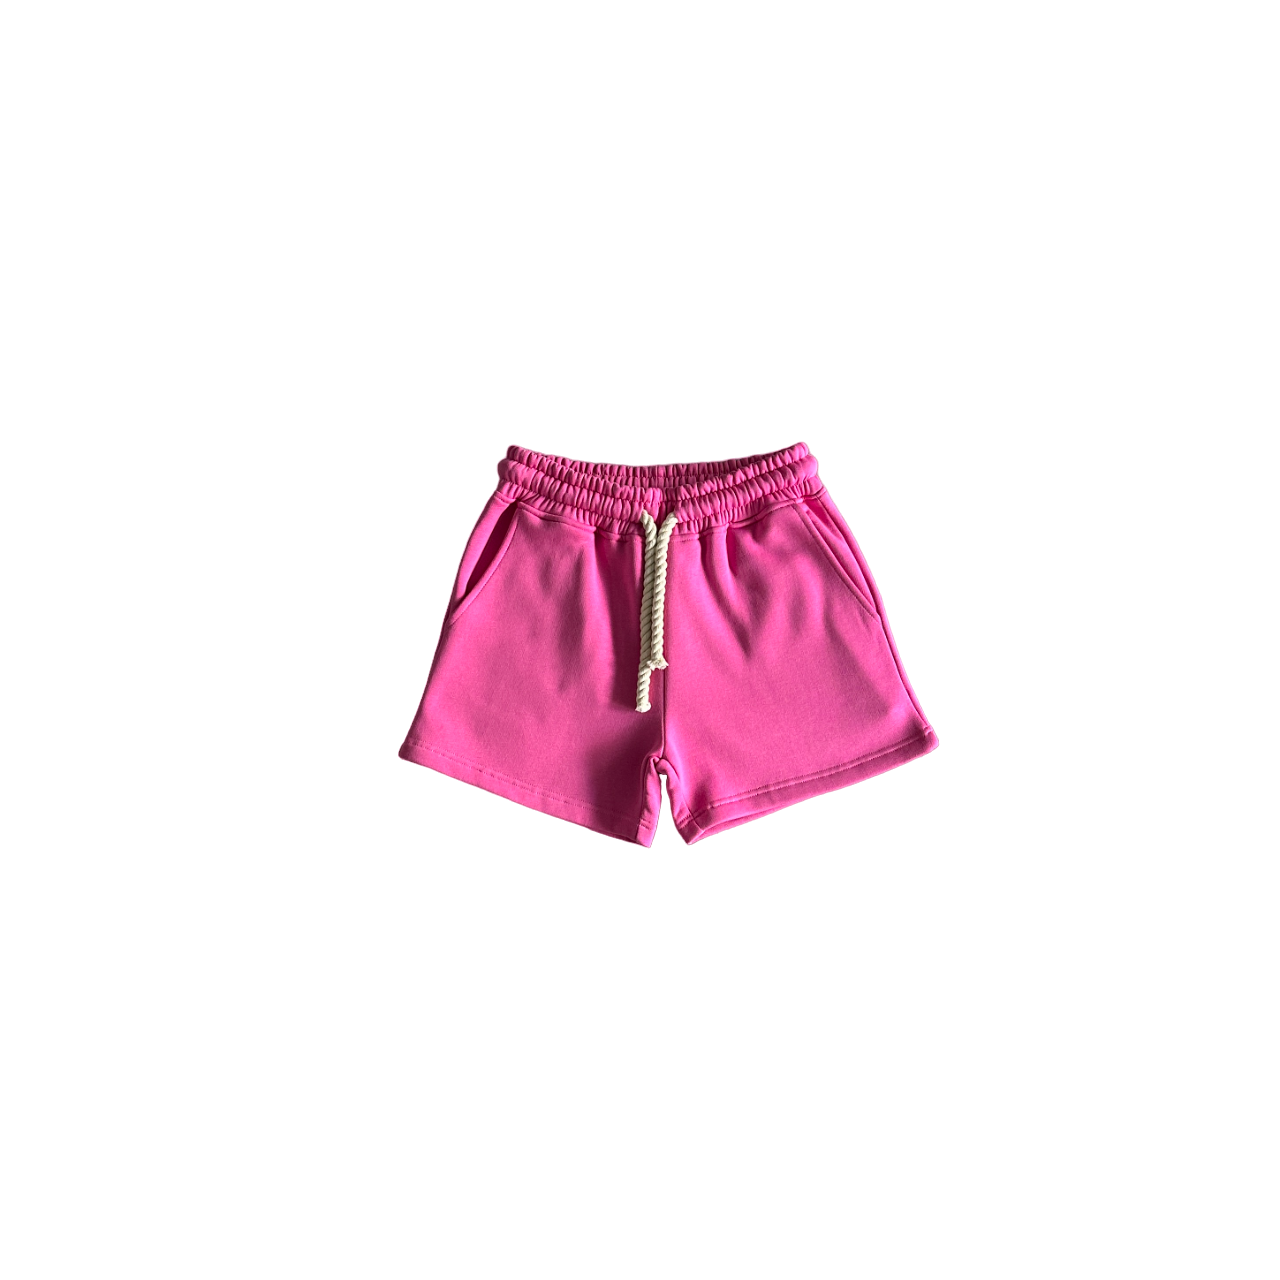 Syna World Team Womens Twinset - (PINK)